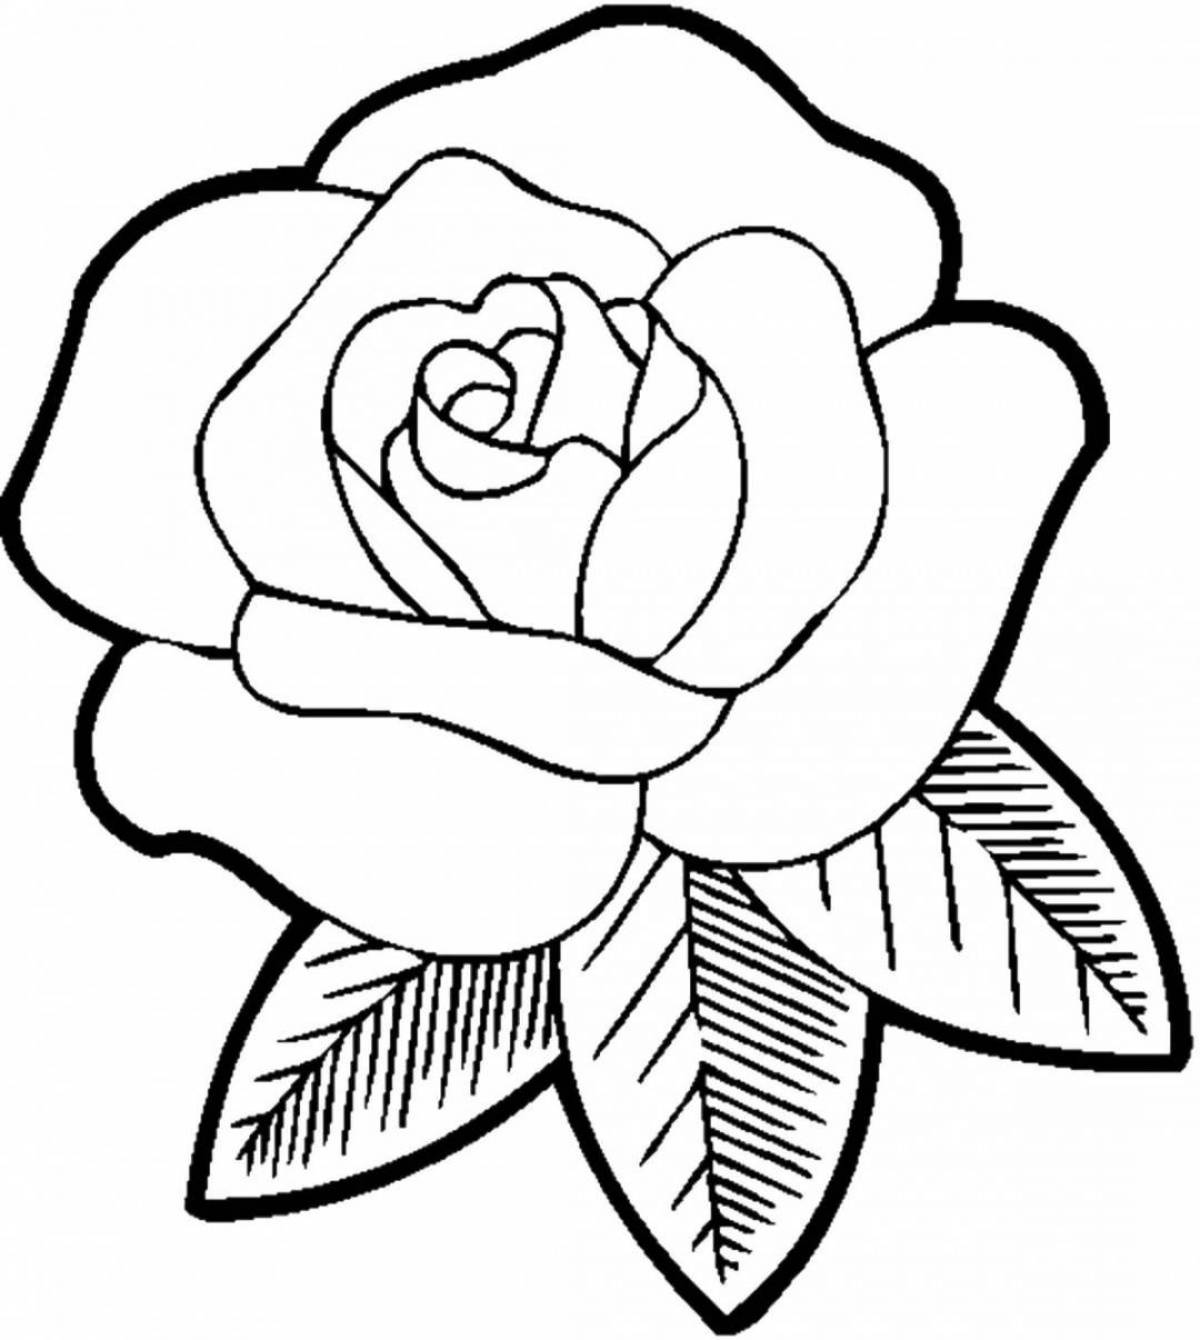 Spectacular coloring pages